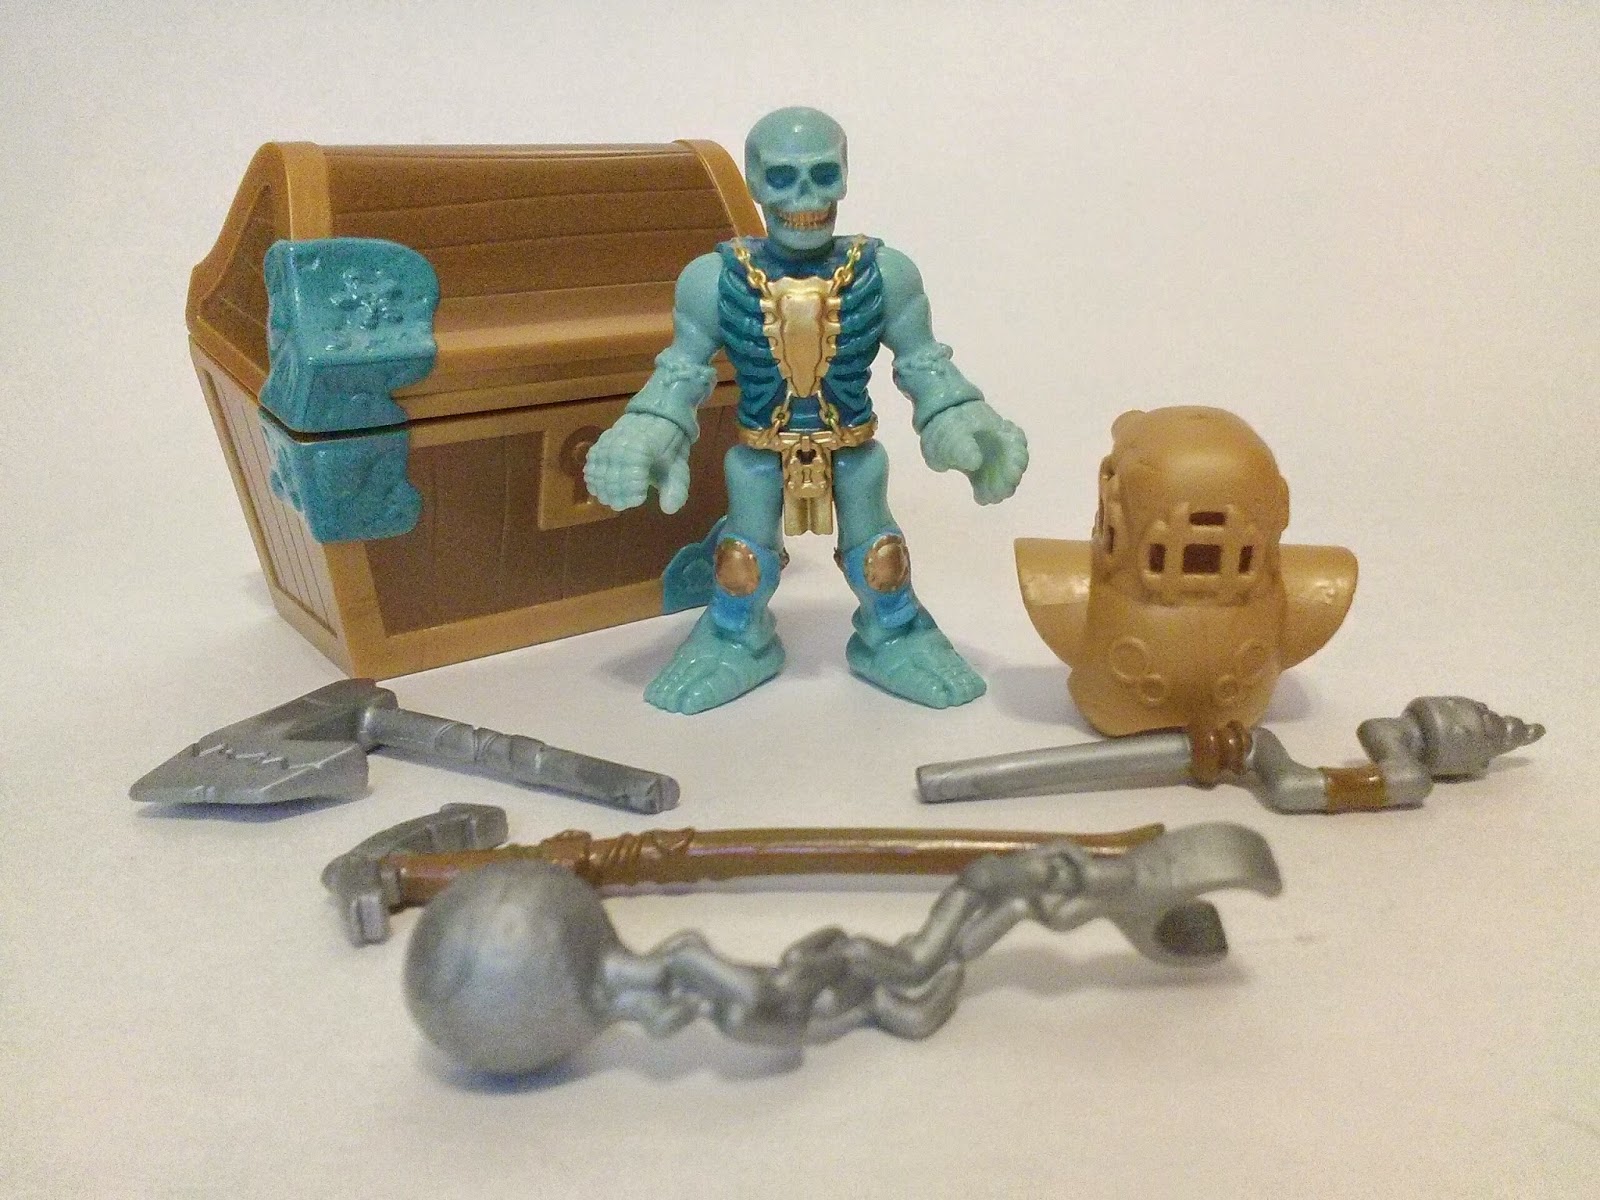 New Details about   Imaginext Pirate Skeleton Diver Figure 